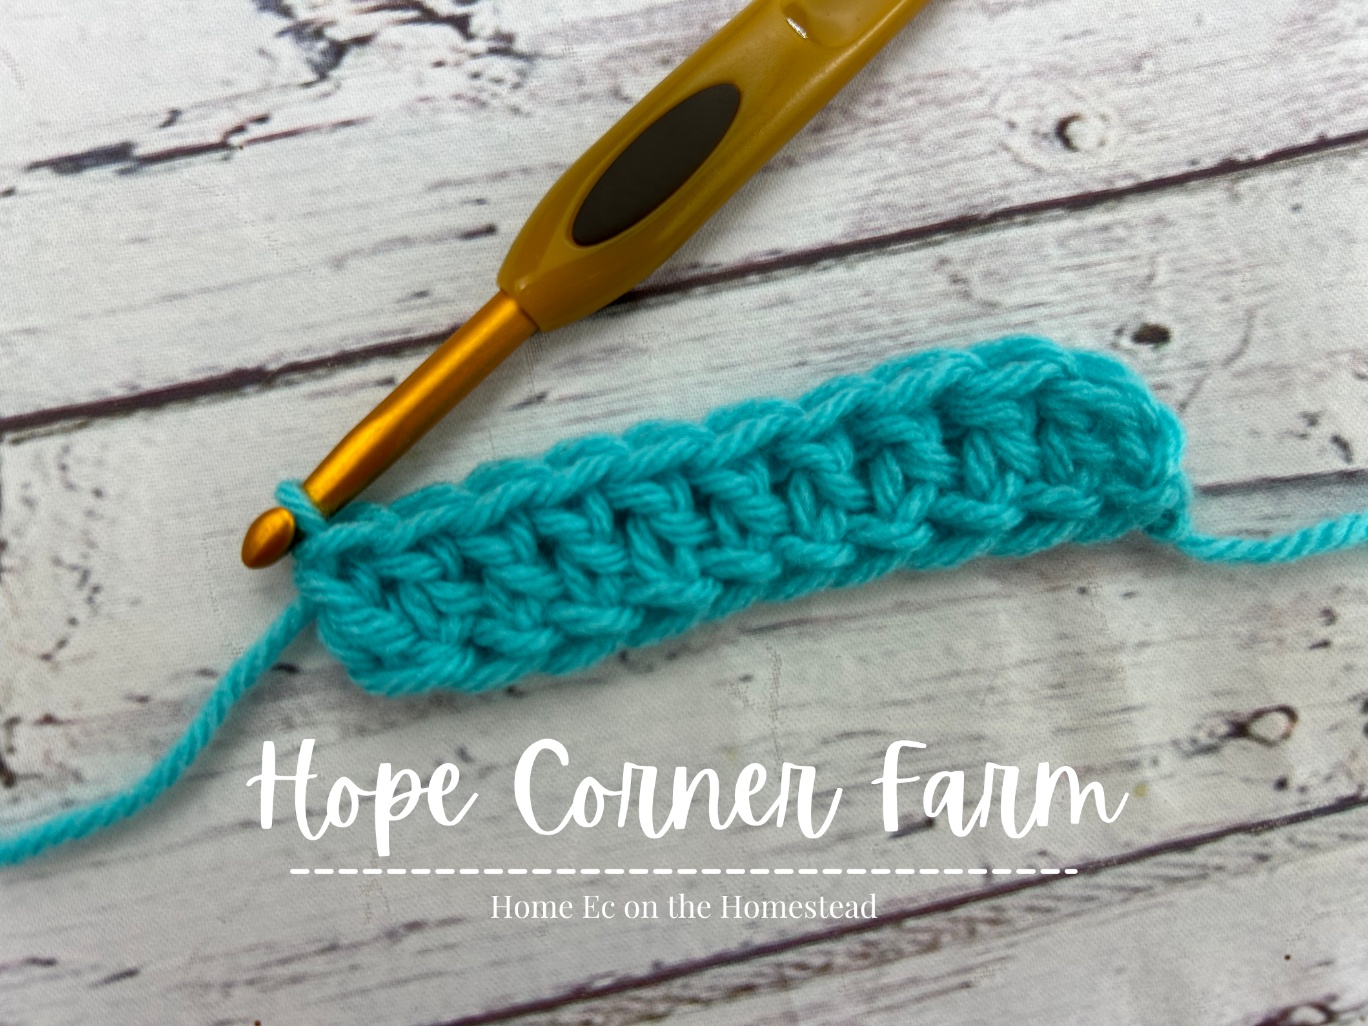 How to Foundation Double Crochet Stitch